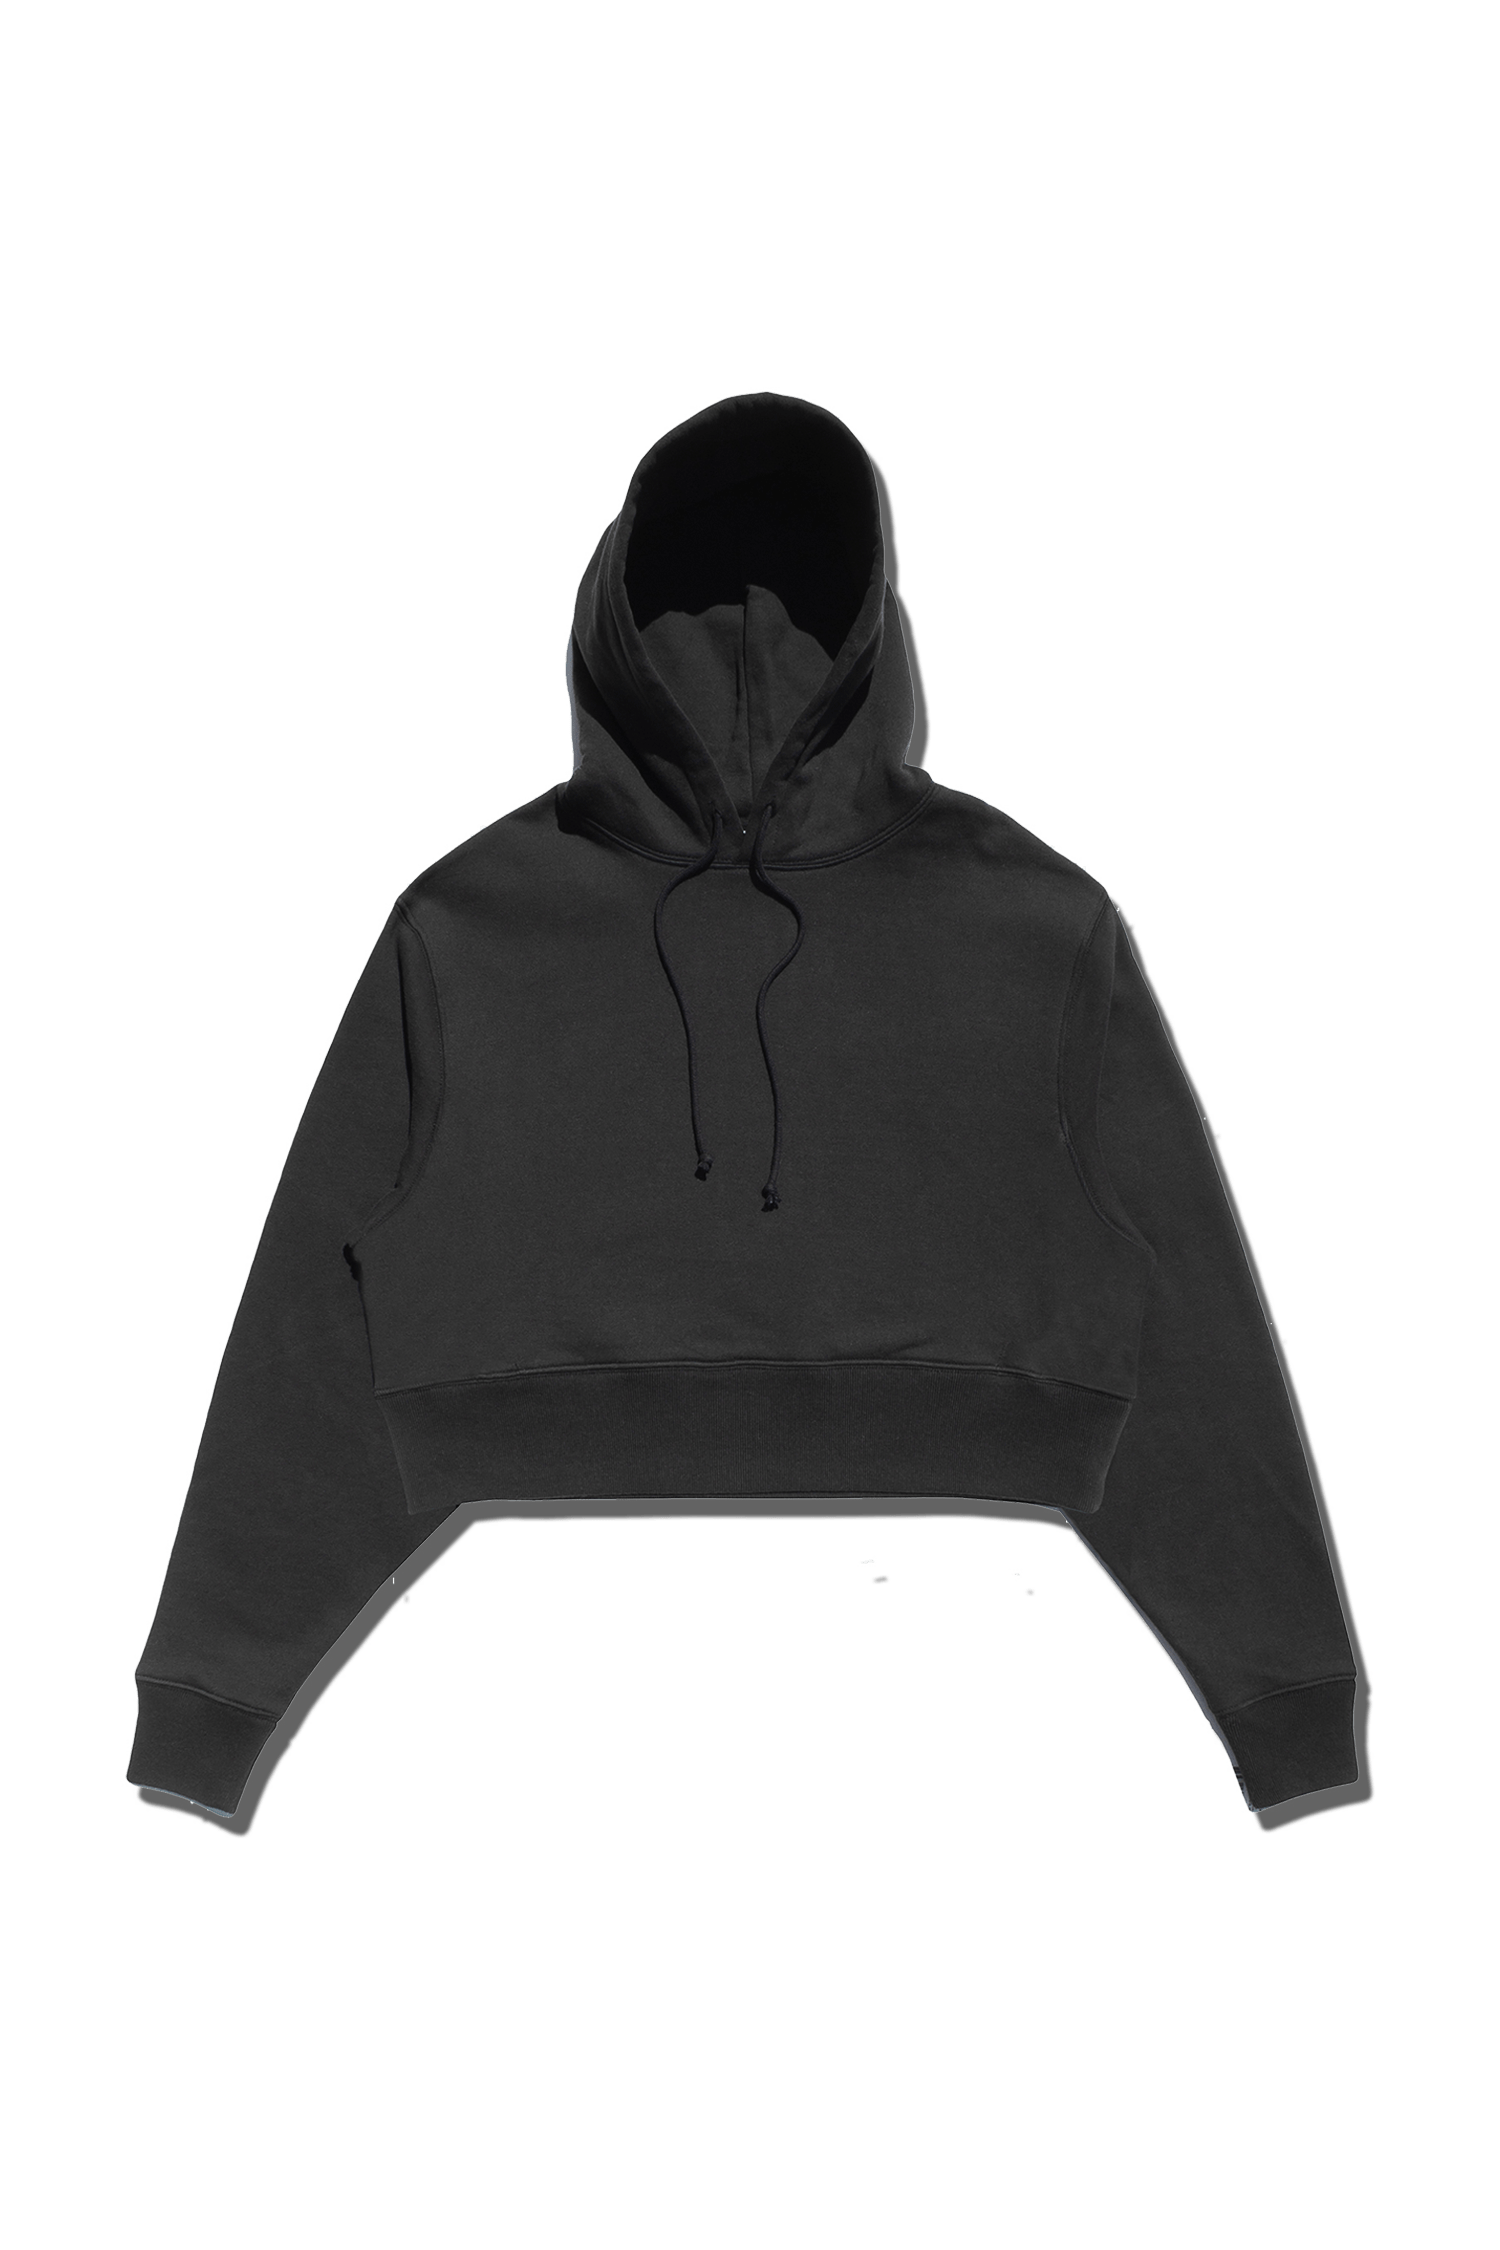 Cropped Hoodie Png Graphic